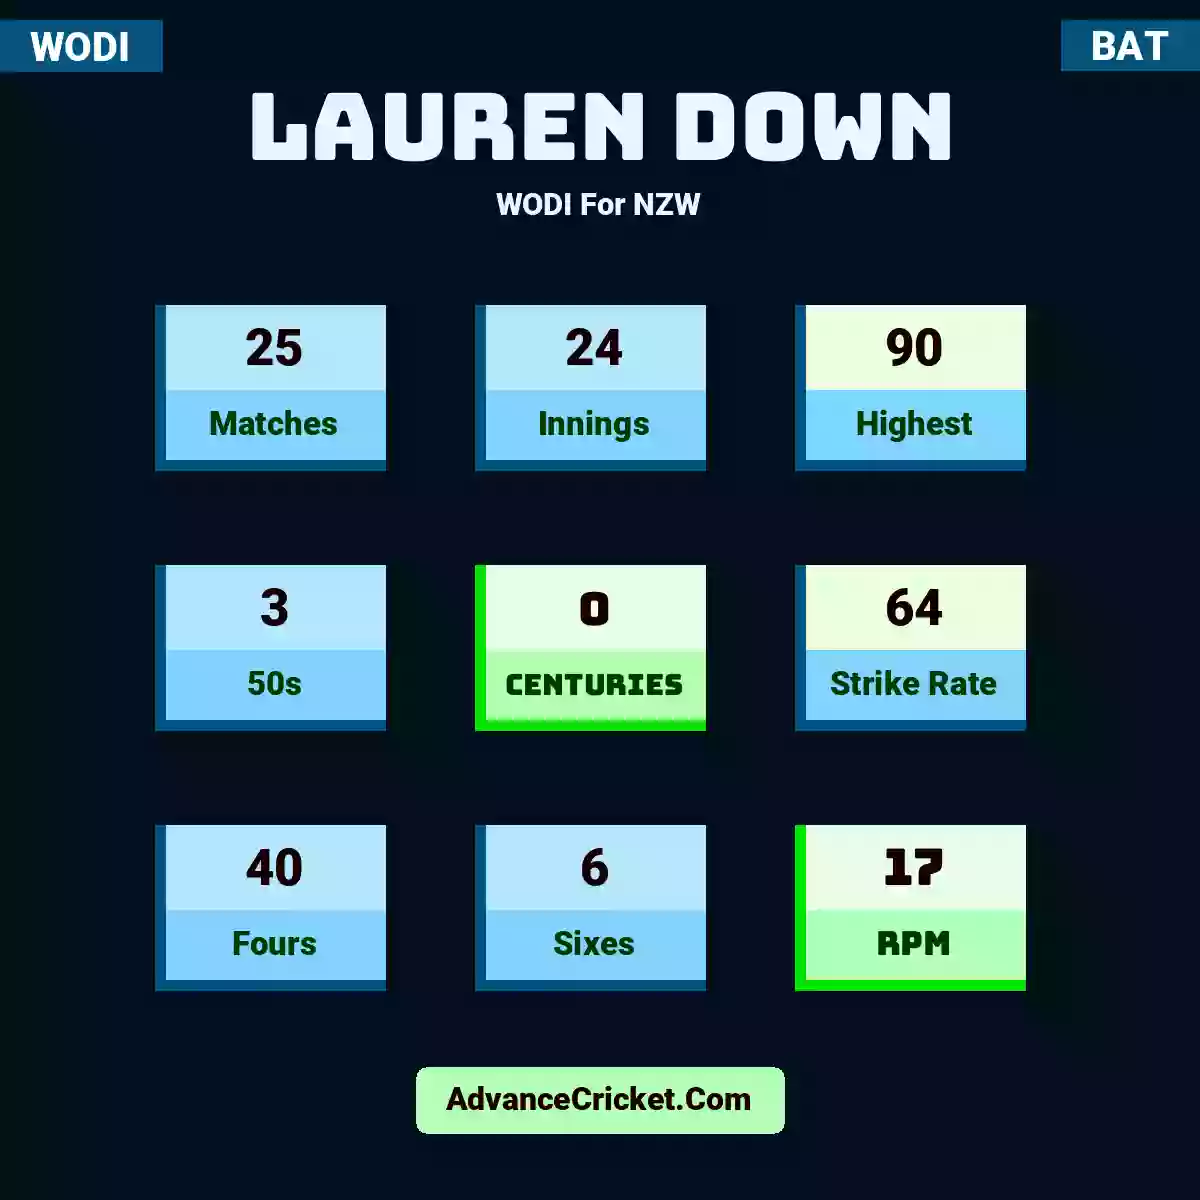 Lauren Down WODI  For NZW, Lauren Down played 25 matches, scored 90 runs as highest, 3 half-centuries, and 0 centuries, with a strike rate of 64. L.Down hit 40 fours and 6 sixes, with an RPM of 17.